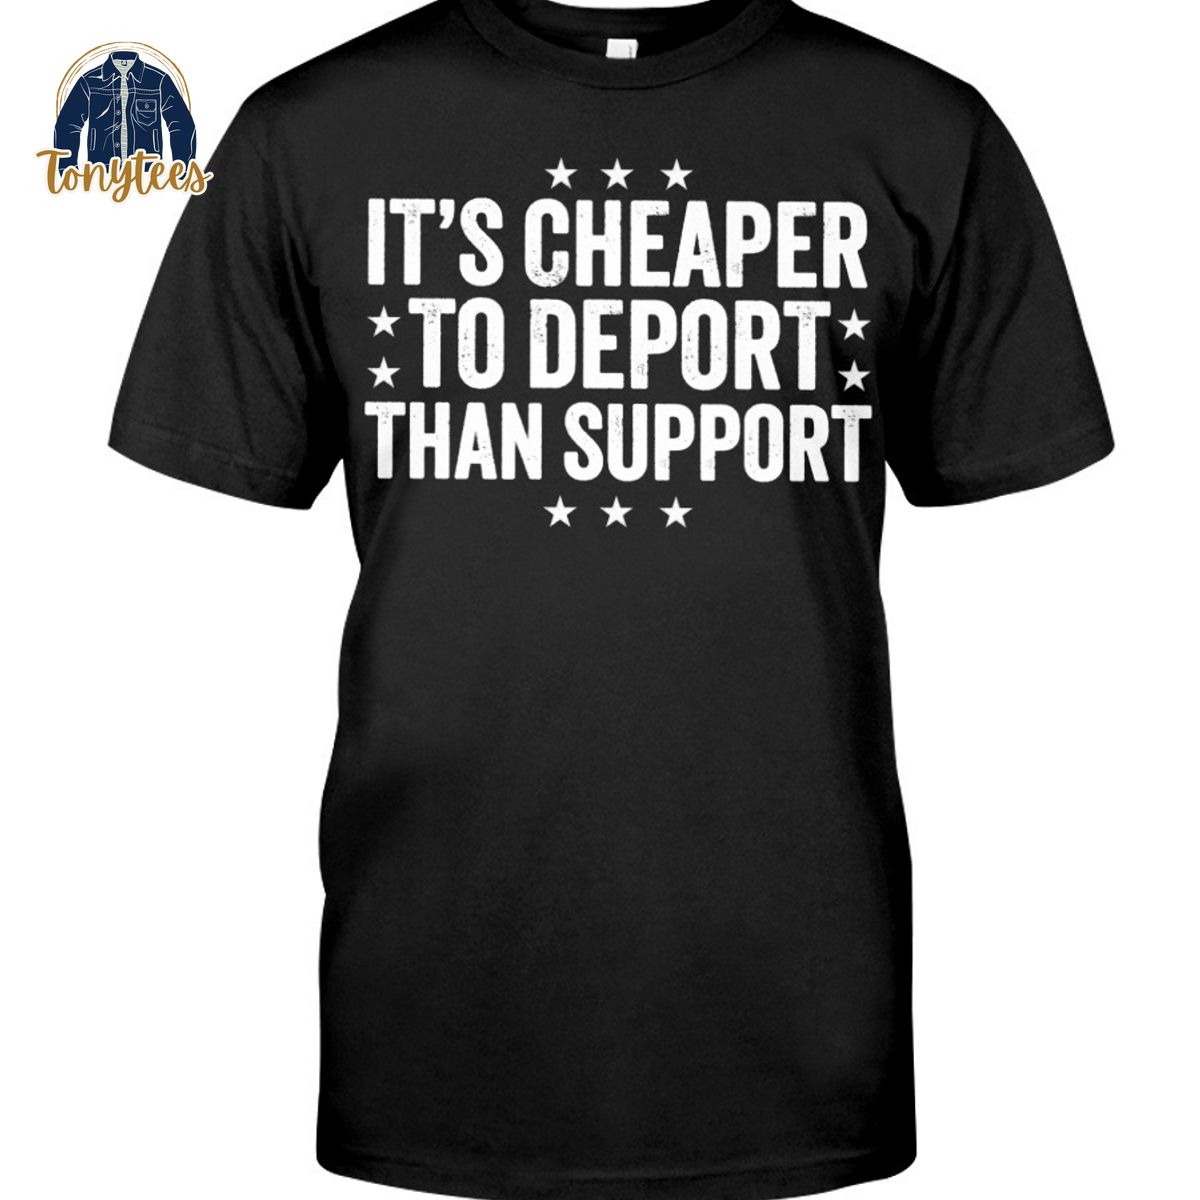 It’s cheaper to deport than support shirt